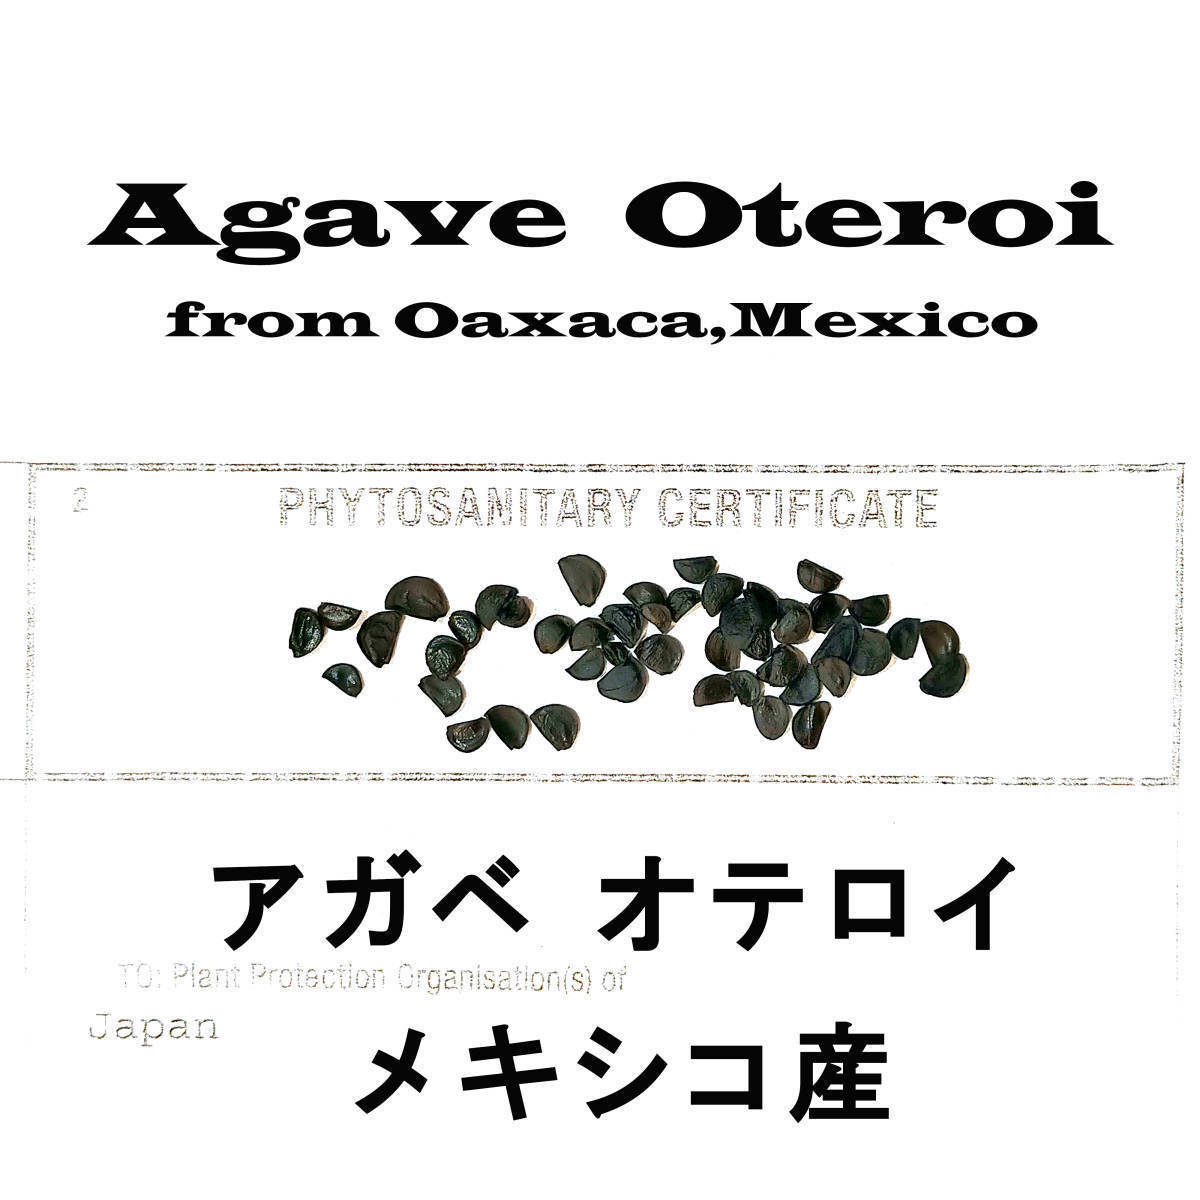 11 month arrival 500 bead + Mexico production o terrorism i seeds kind certificate equipped Agave oteroichitanotatitanota FO-076 agave 